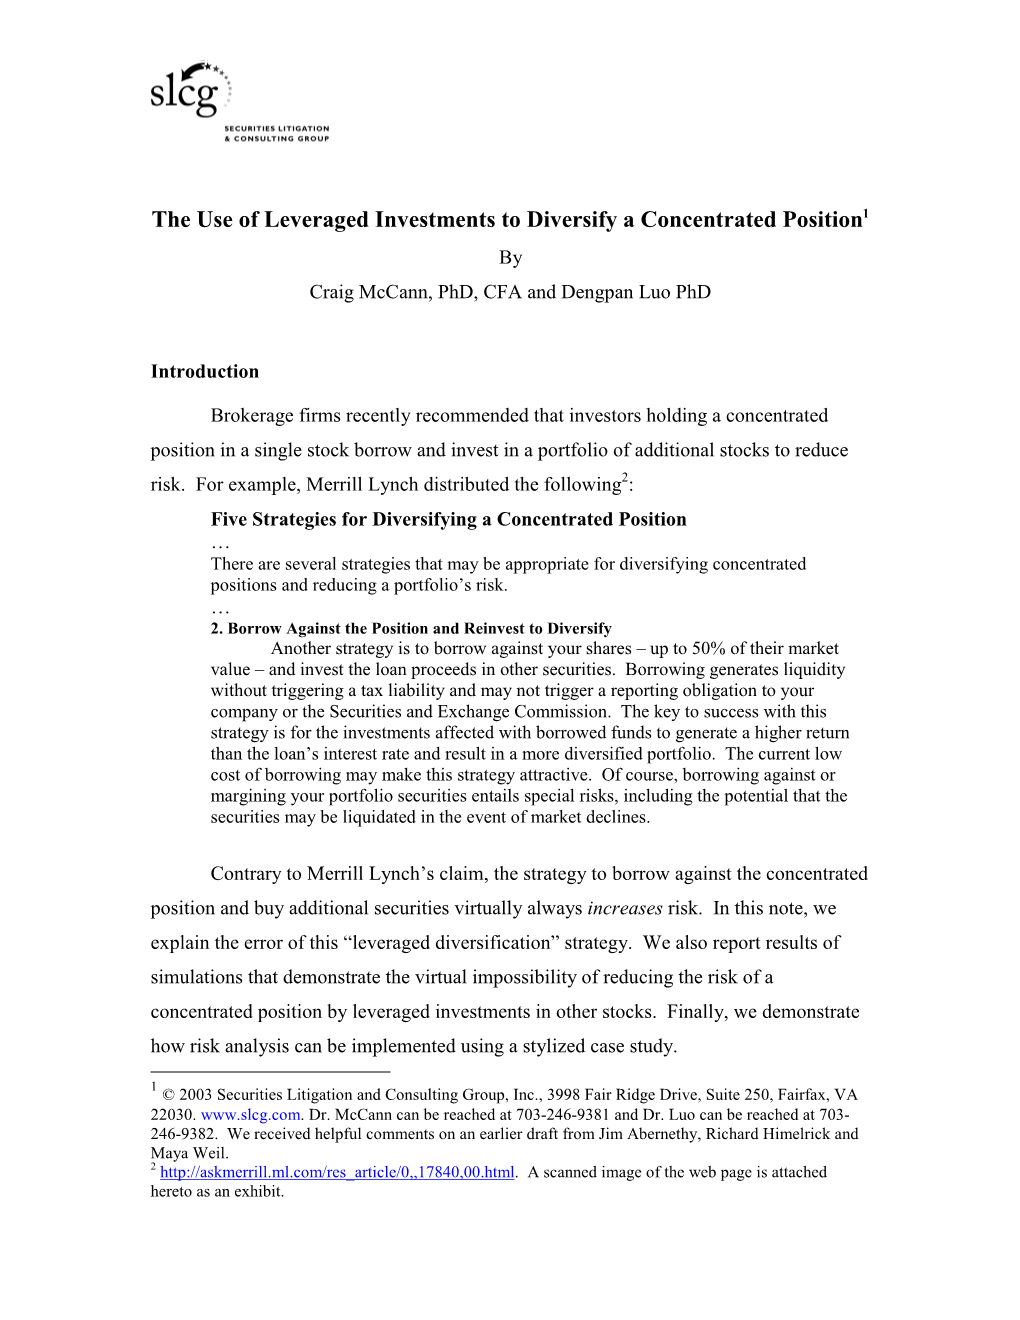 The Use of Leveraged Investments to Diversify a Concentrated Position1 by Craig Mccann, Phd, CFA and Dengpan Luo Phd